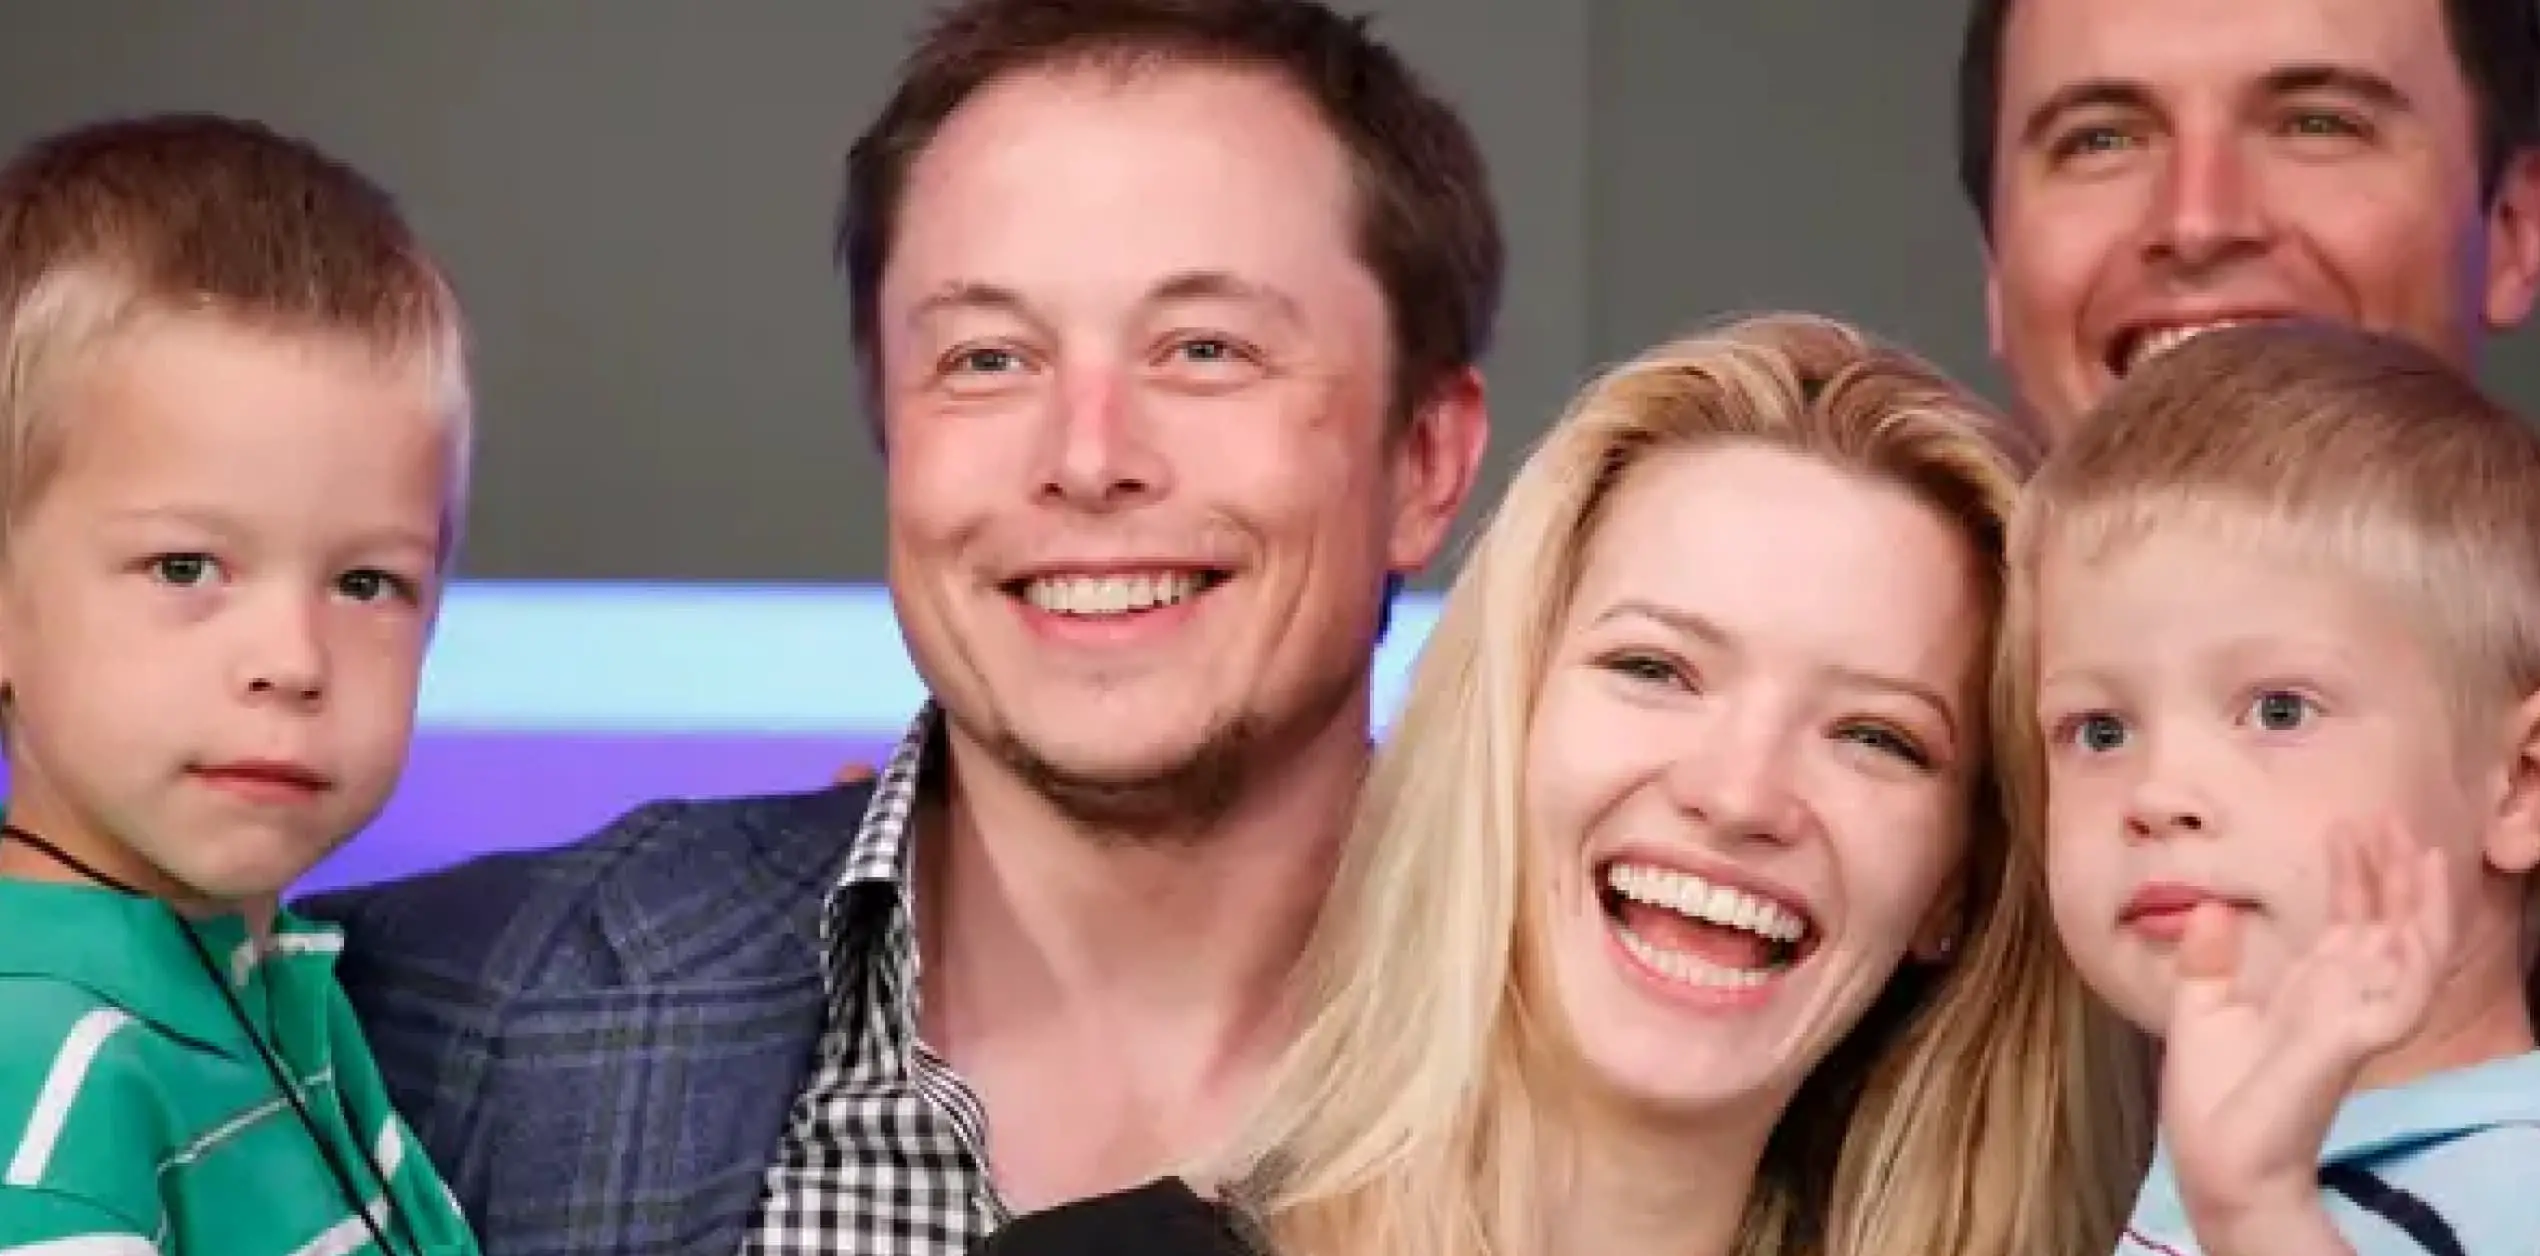 How many kids does Elon Musk have